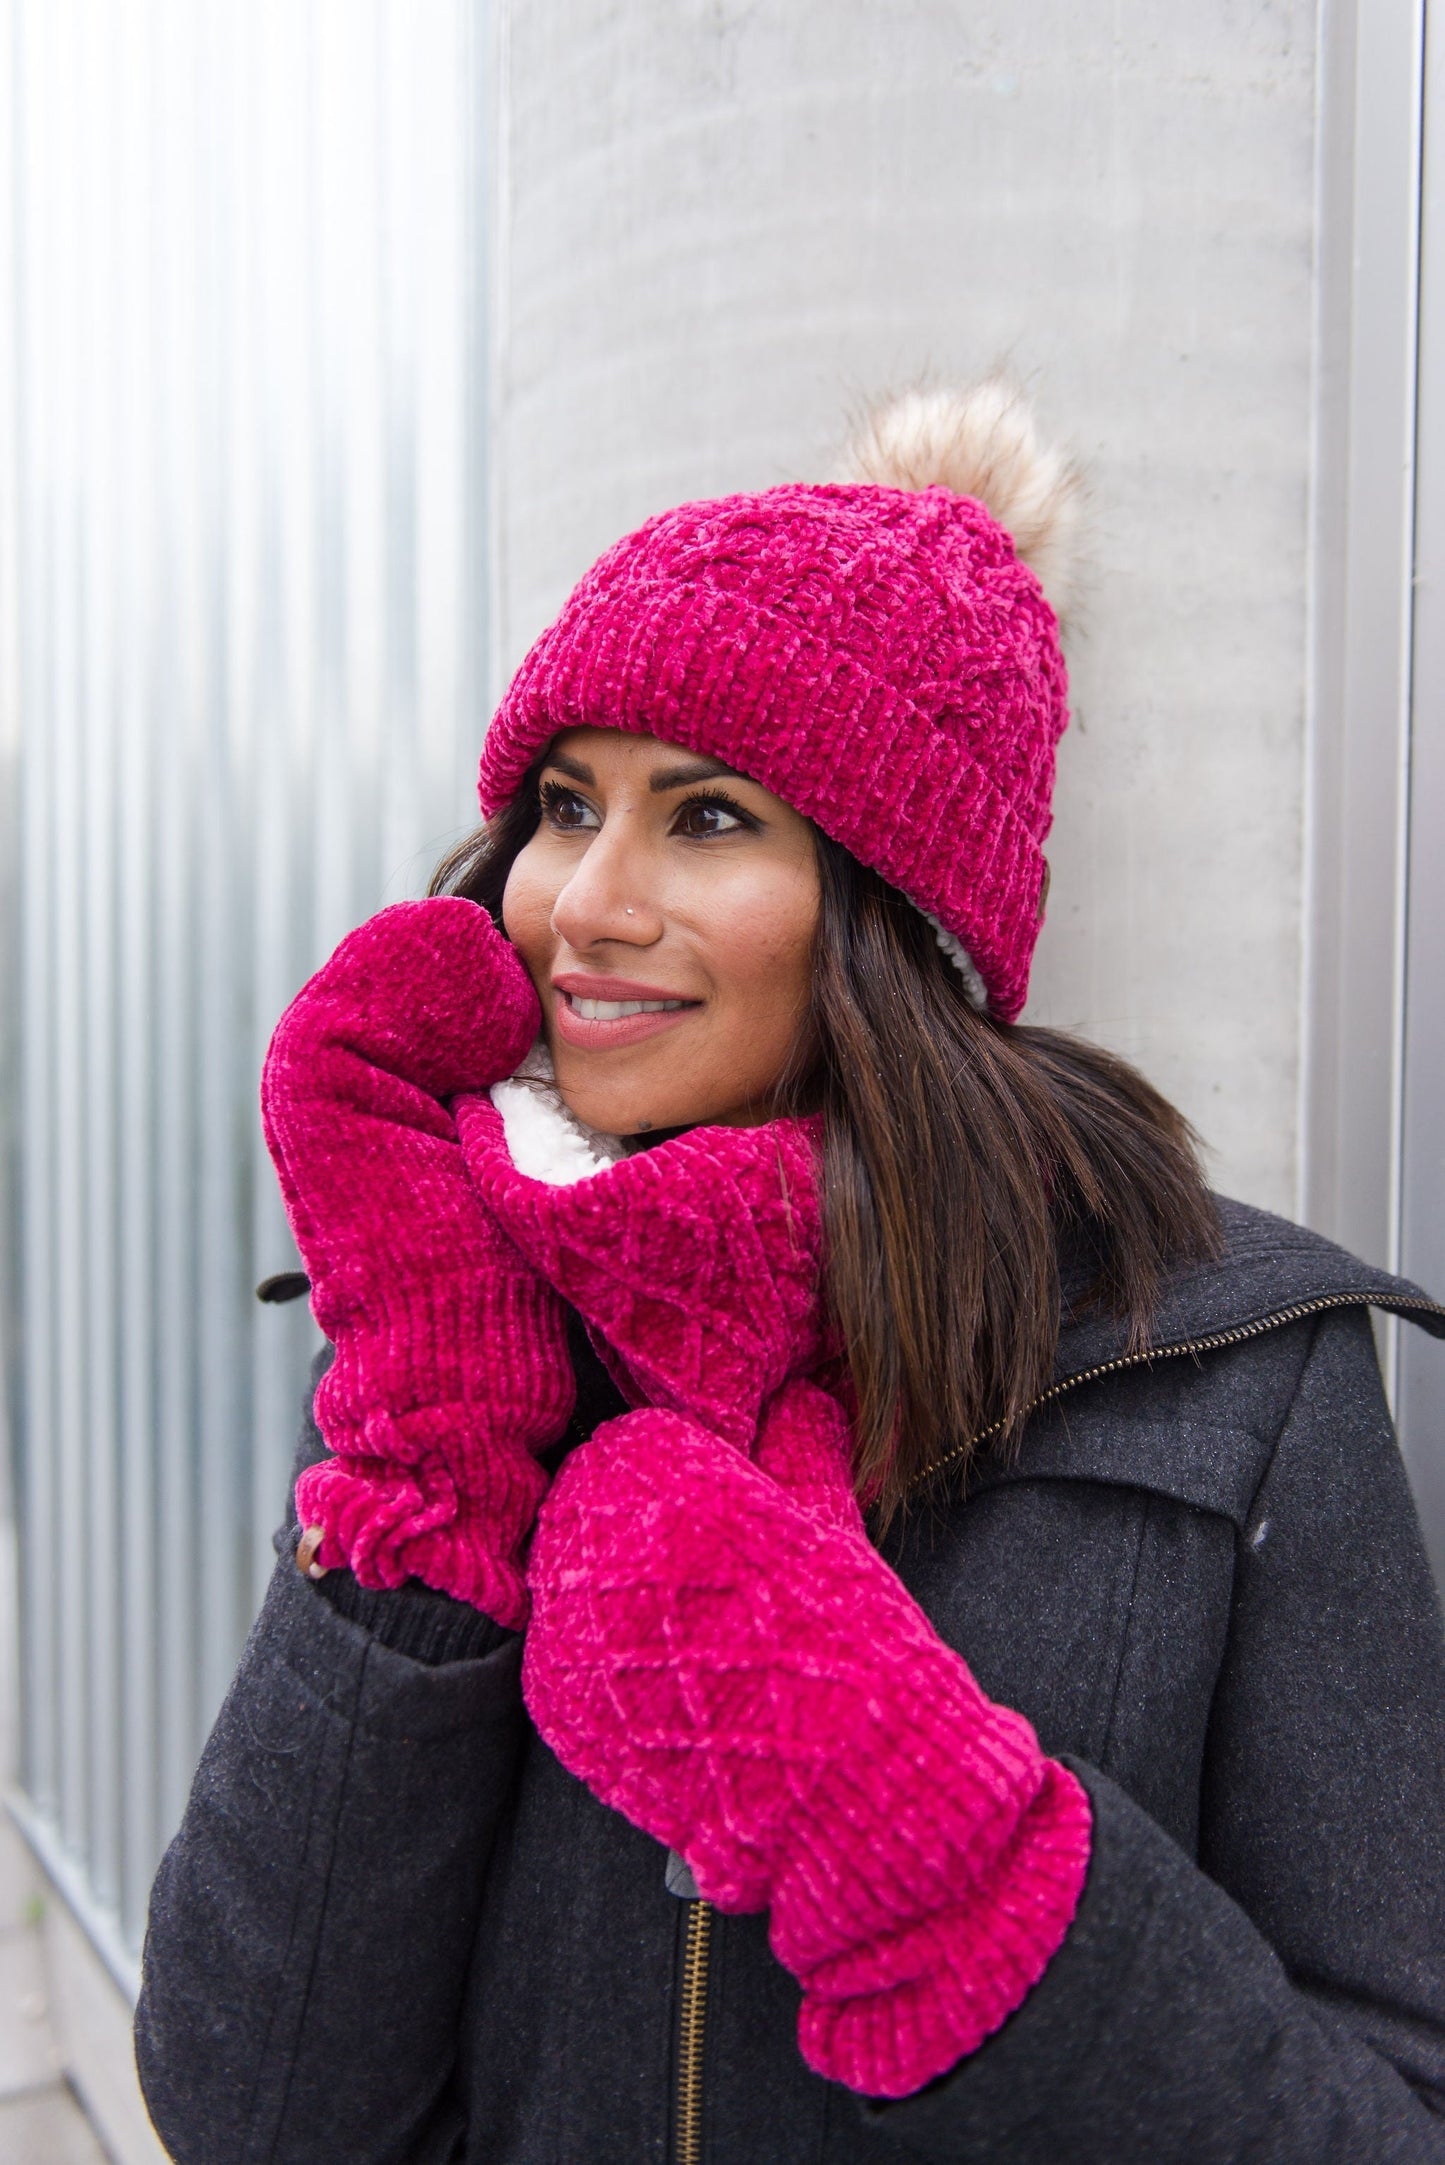 Pudus Cable Knit Winter Infinity Scarf Raspberry, Fleece-Lined Neck Warmer Circle Snood Chenille